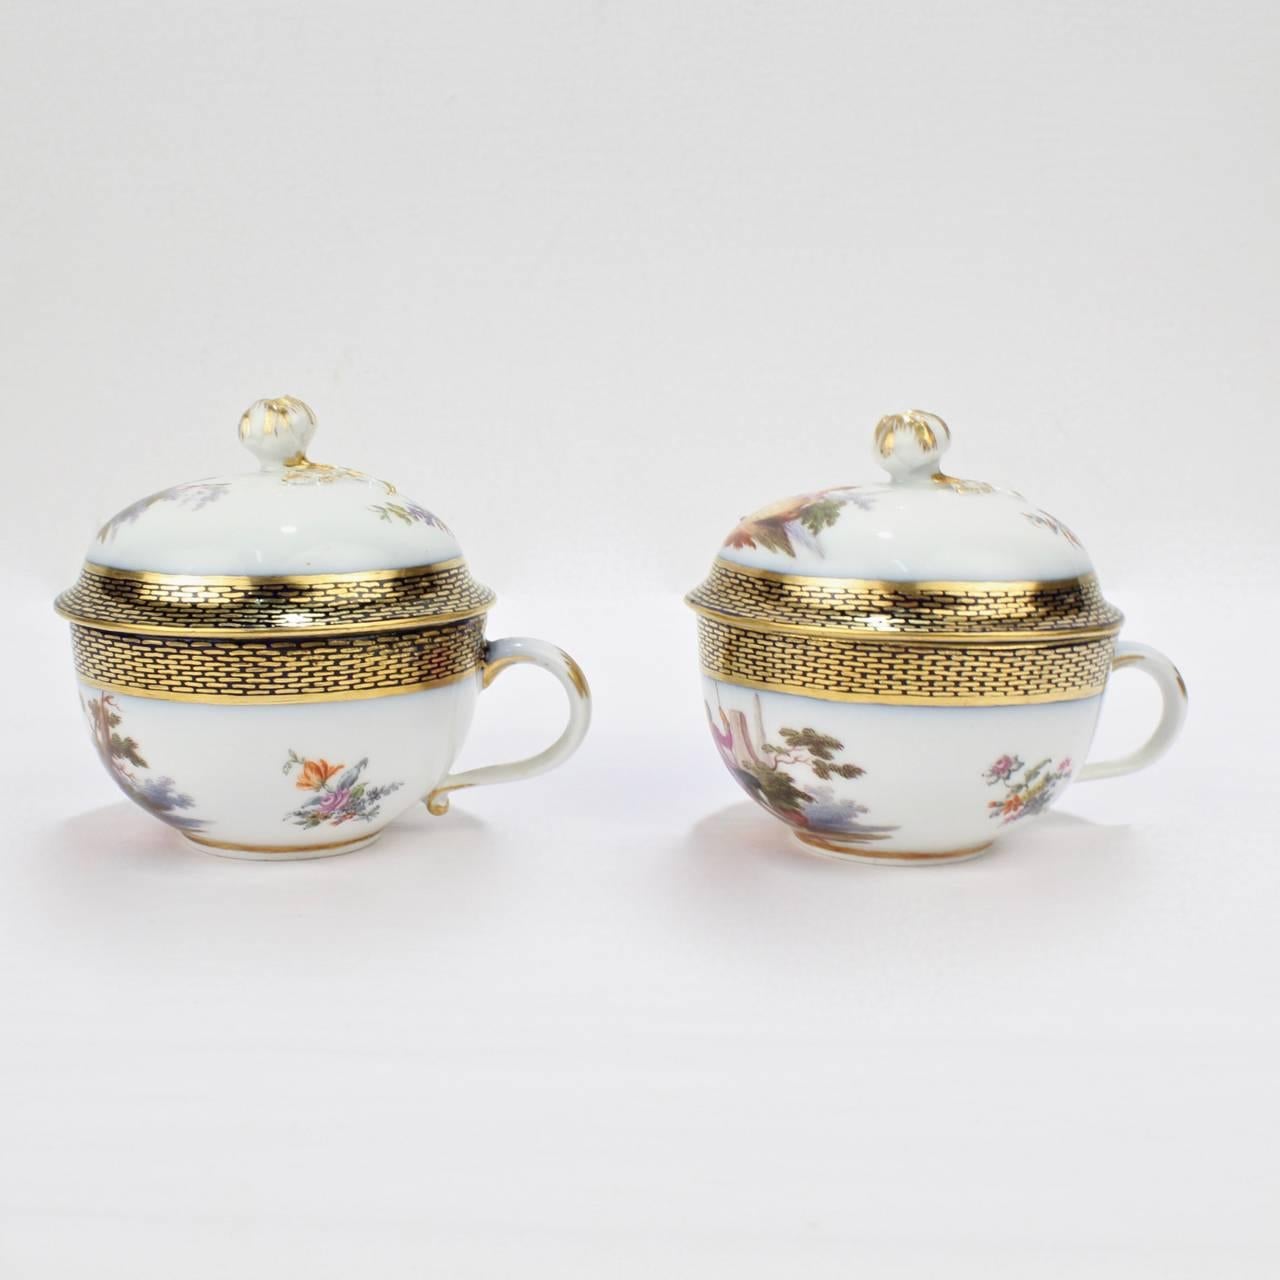 Hand-Painted Pair of Antique Meissen Porcelain Covered Tea Cups and Saucers, 19th Century